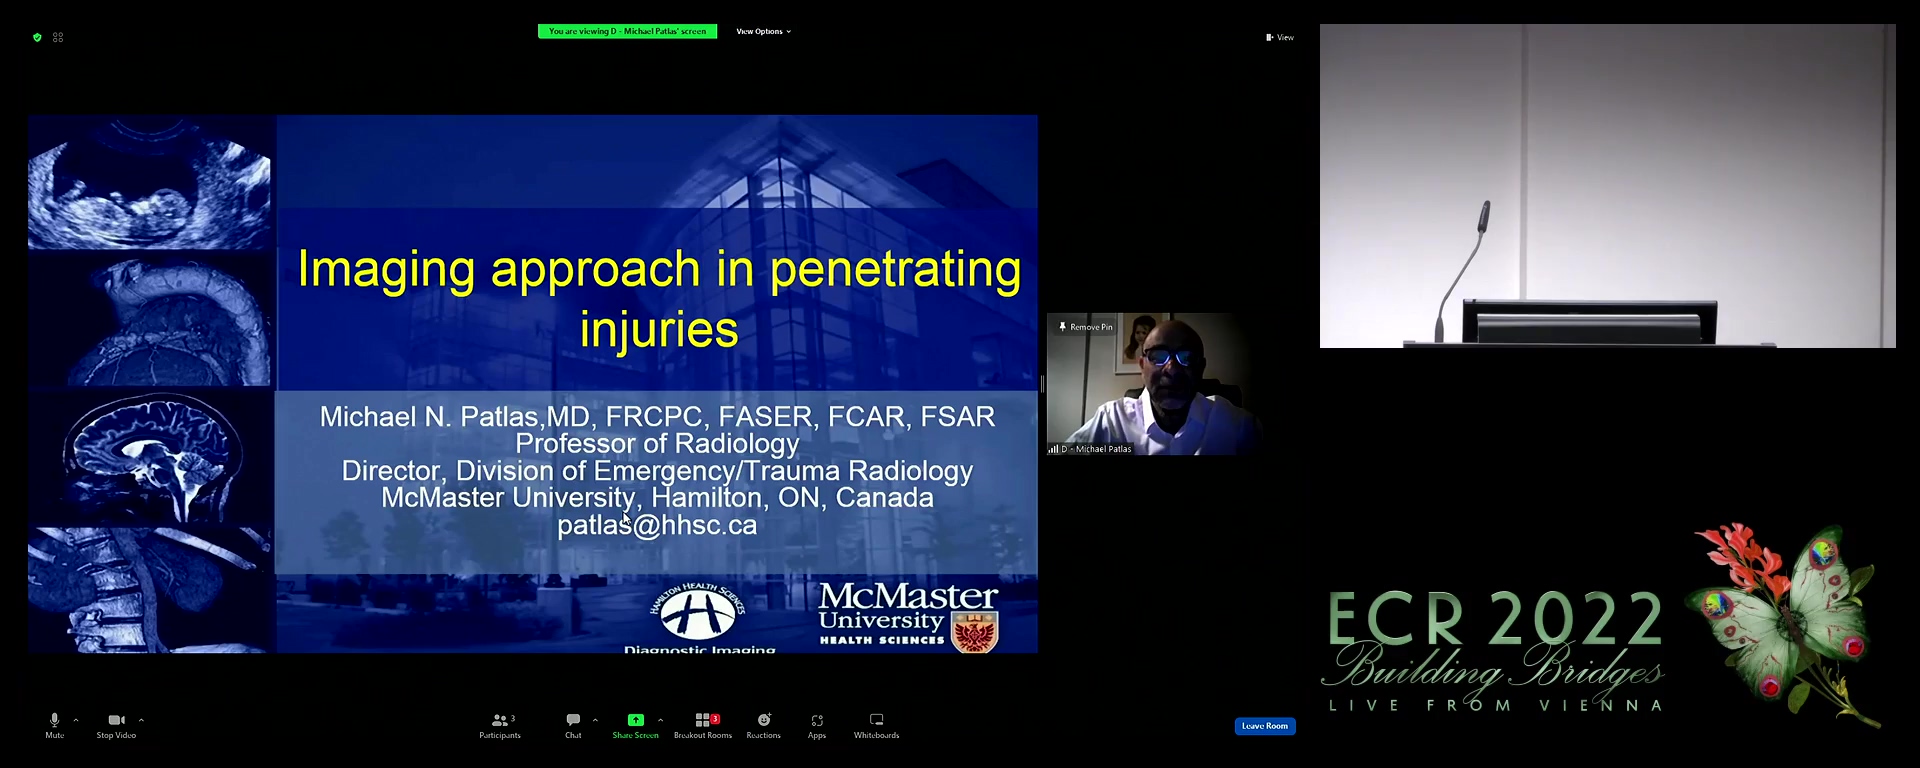 Imaging approach in penetrating injuries - Michael Patlas, Hamilton, ON / CA